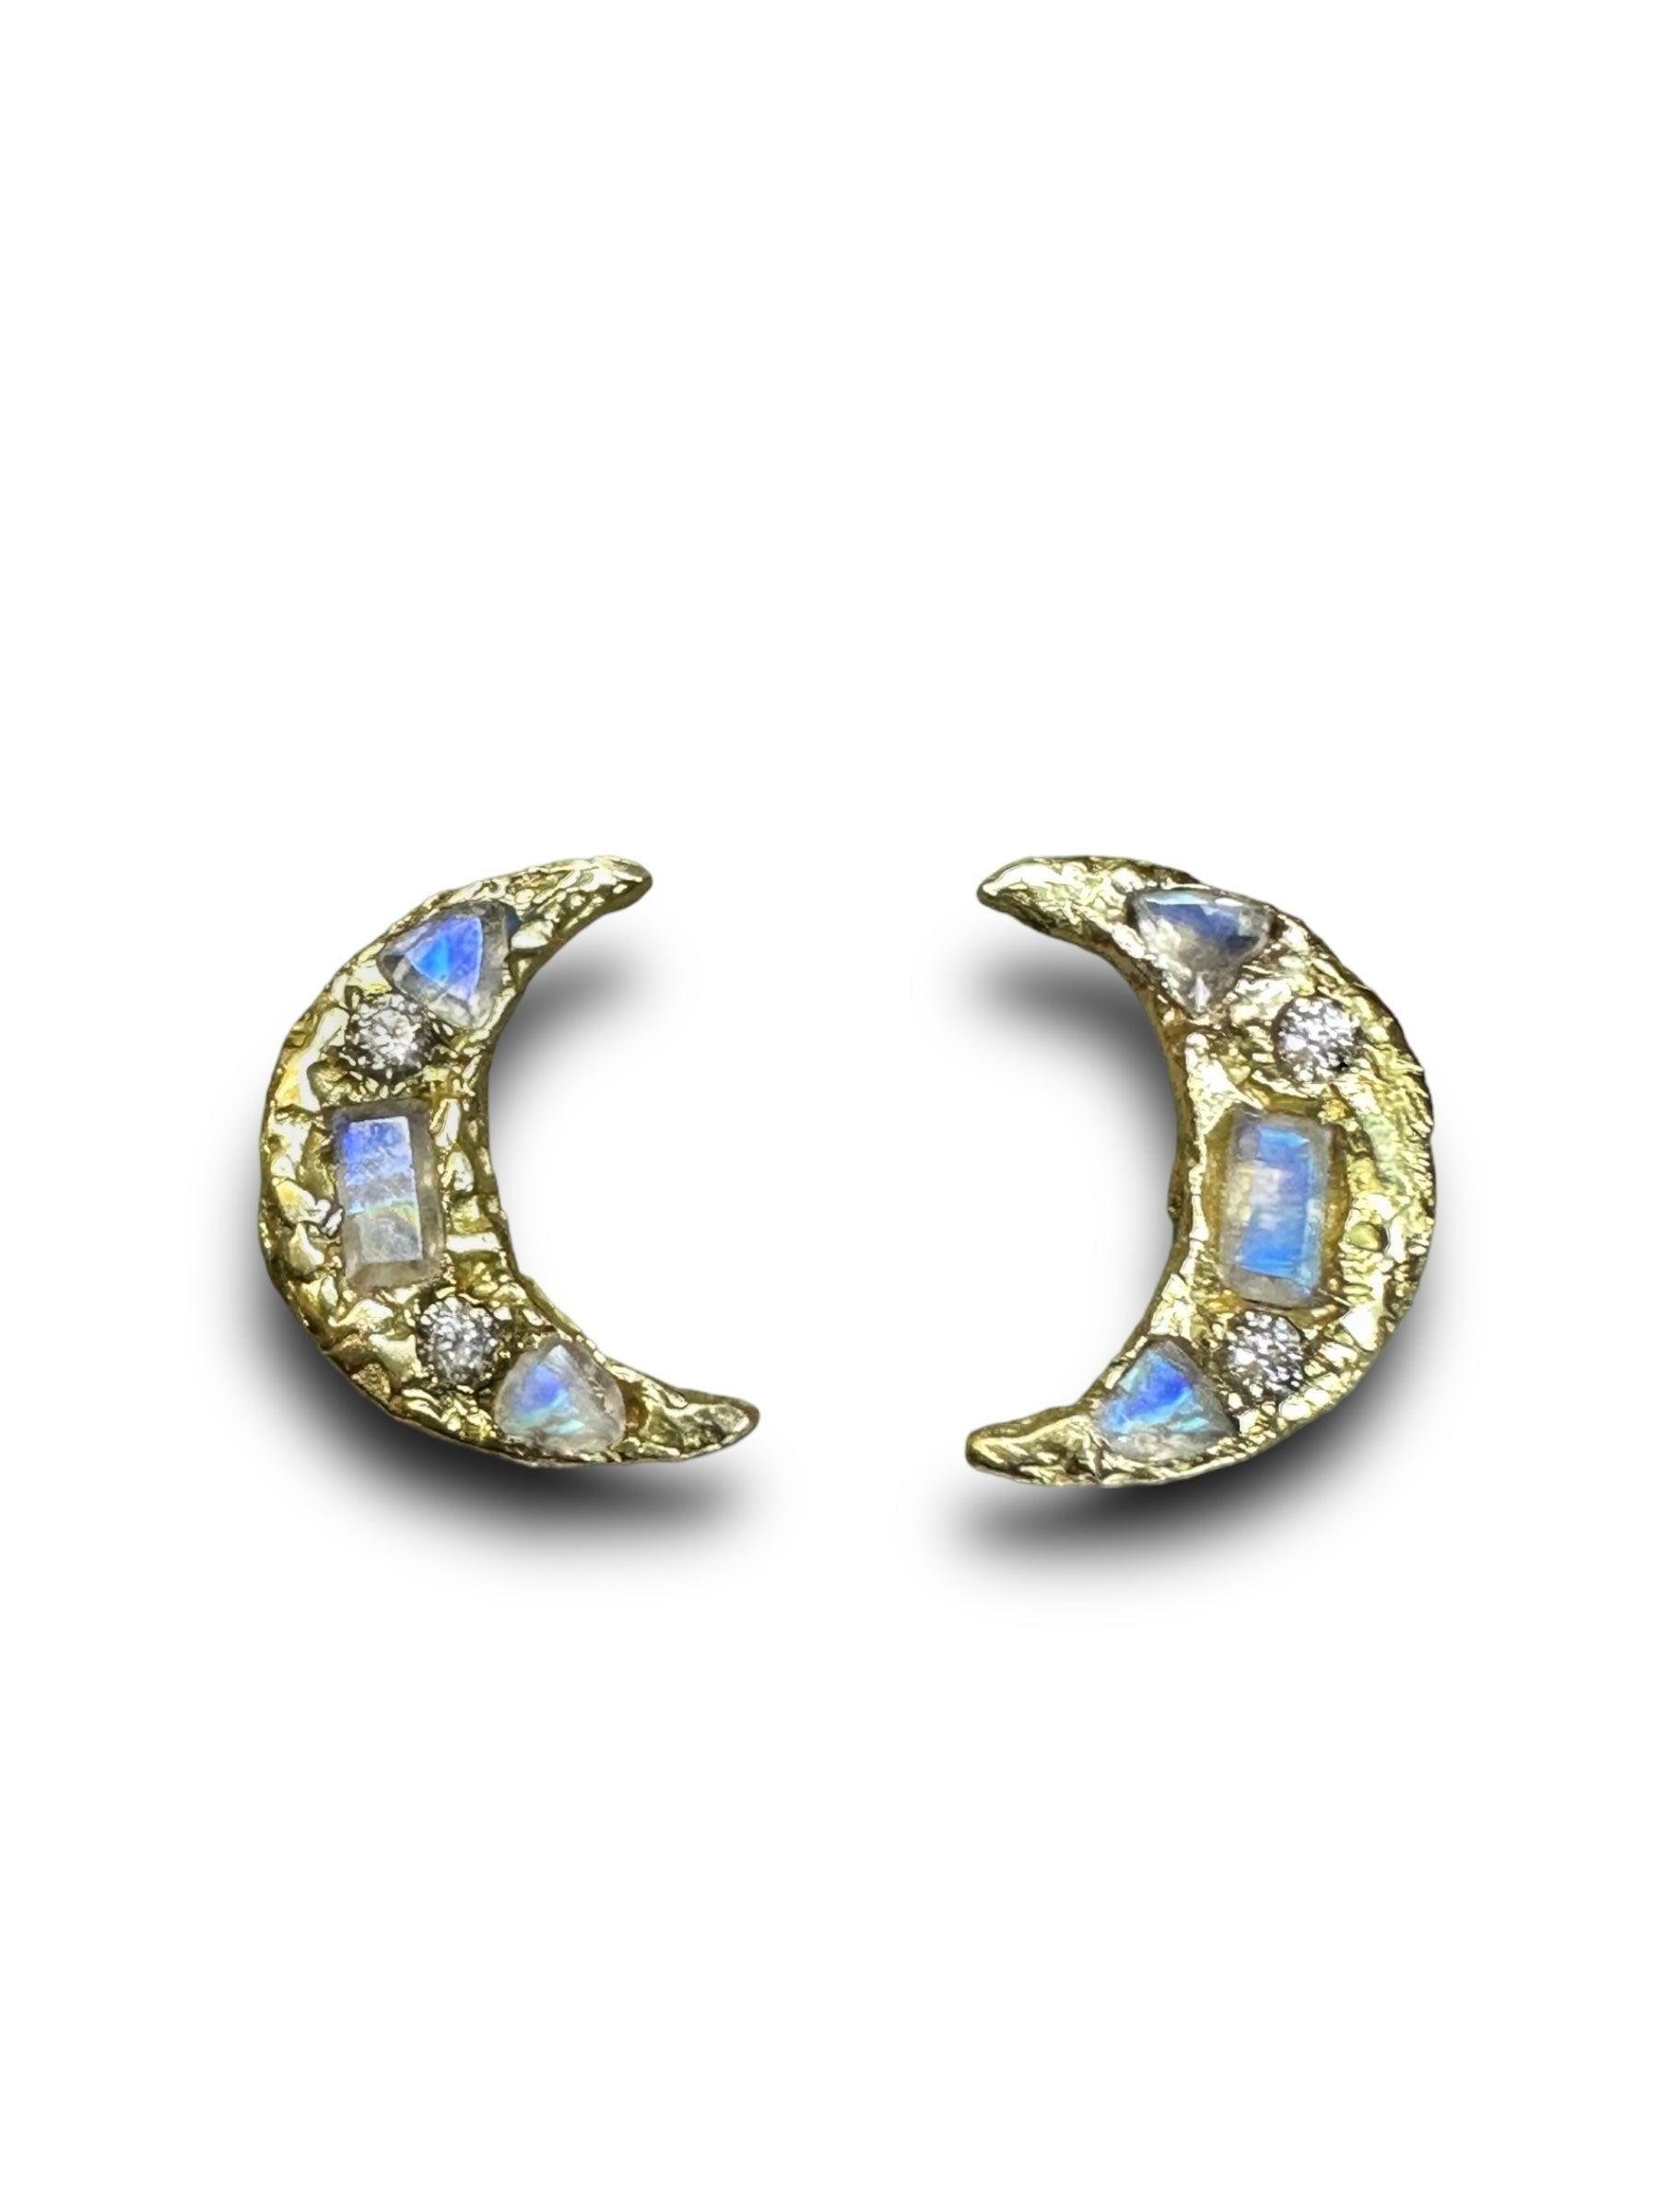 Baguette Cut Moon Crescent stud Earrings Diamonds Moonstones in Gold one of a kind in stock For Sale